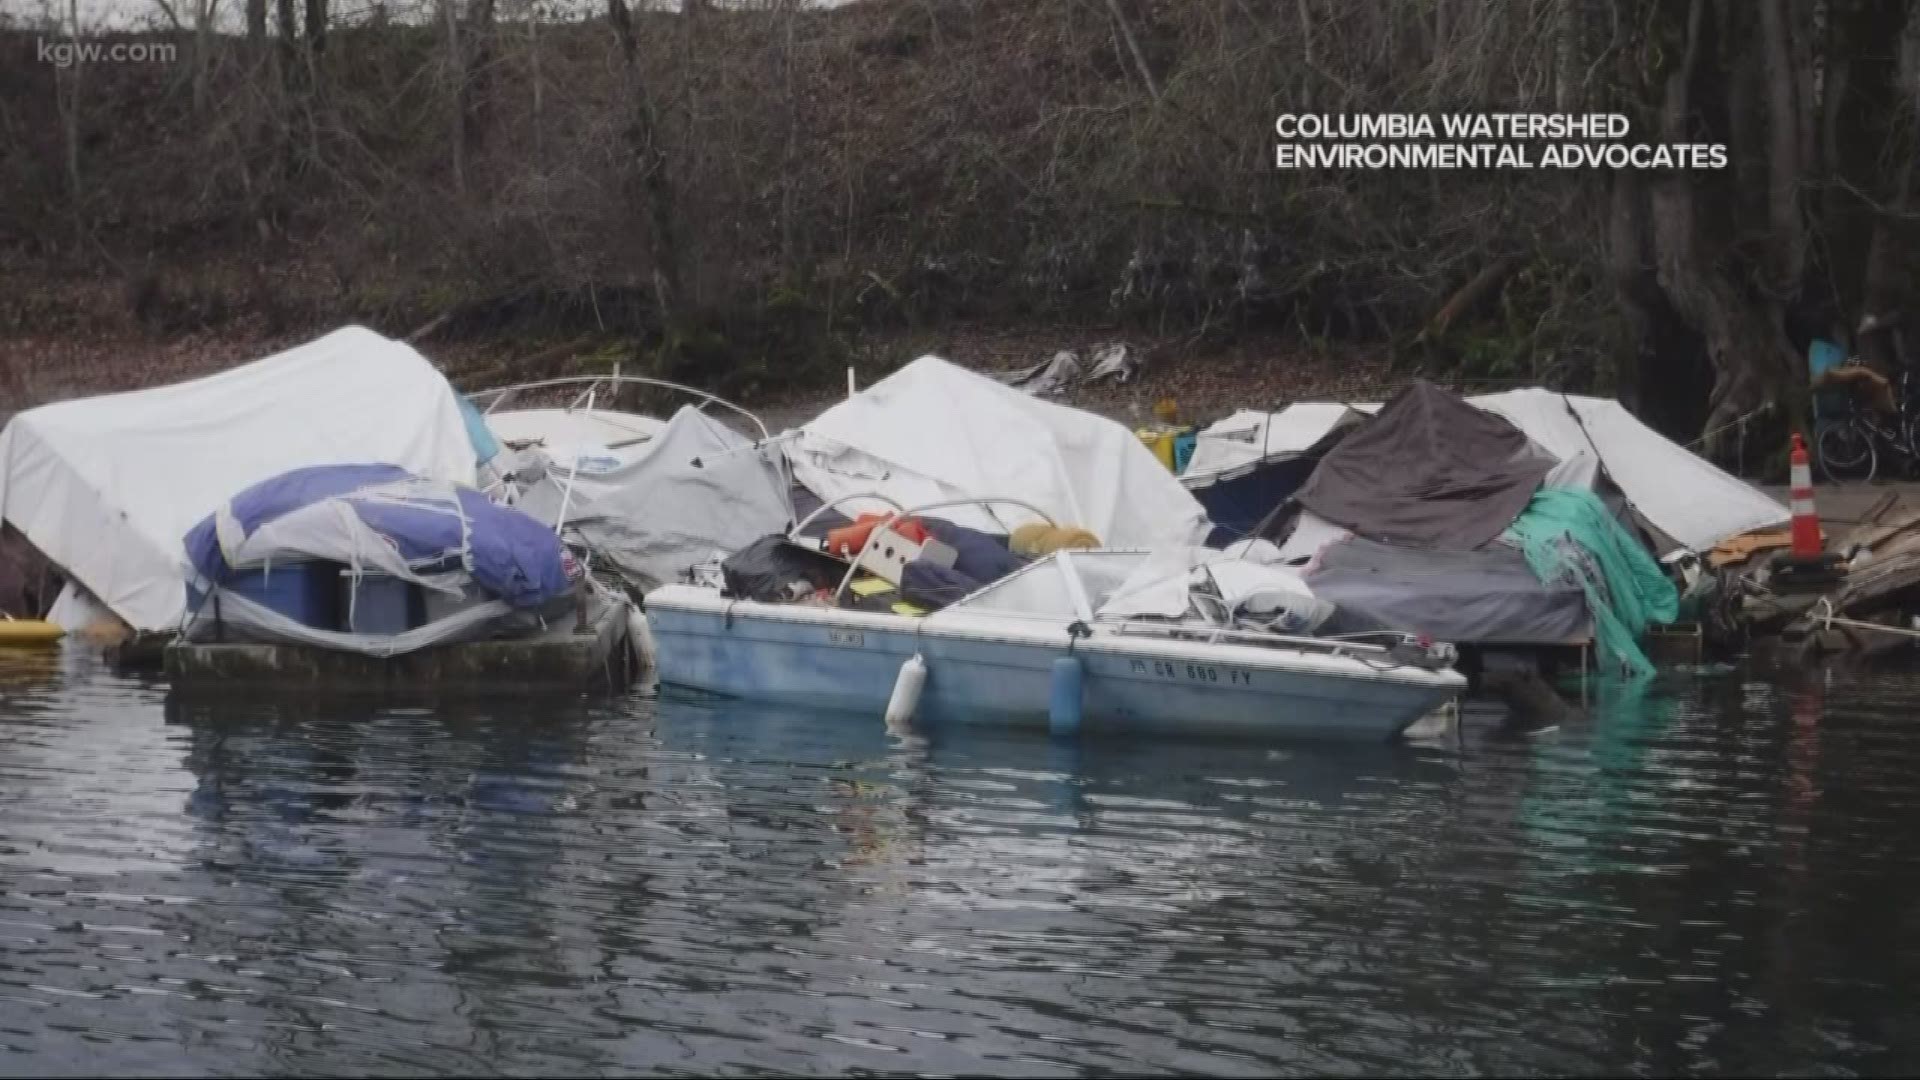 An update about the transient boats on the Columbia River.